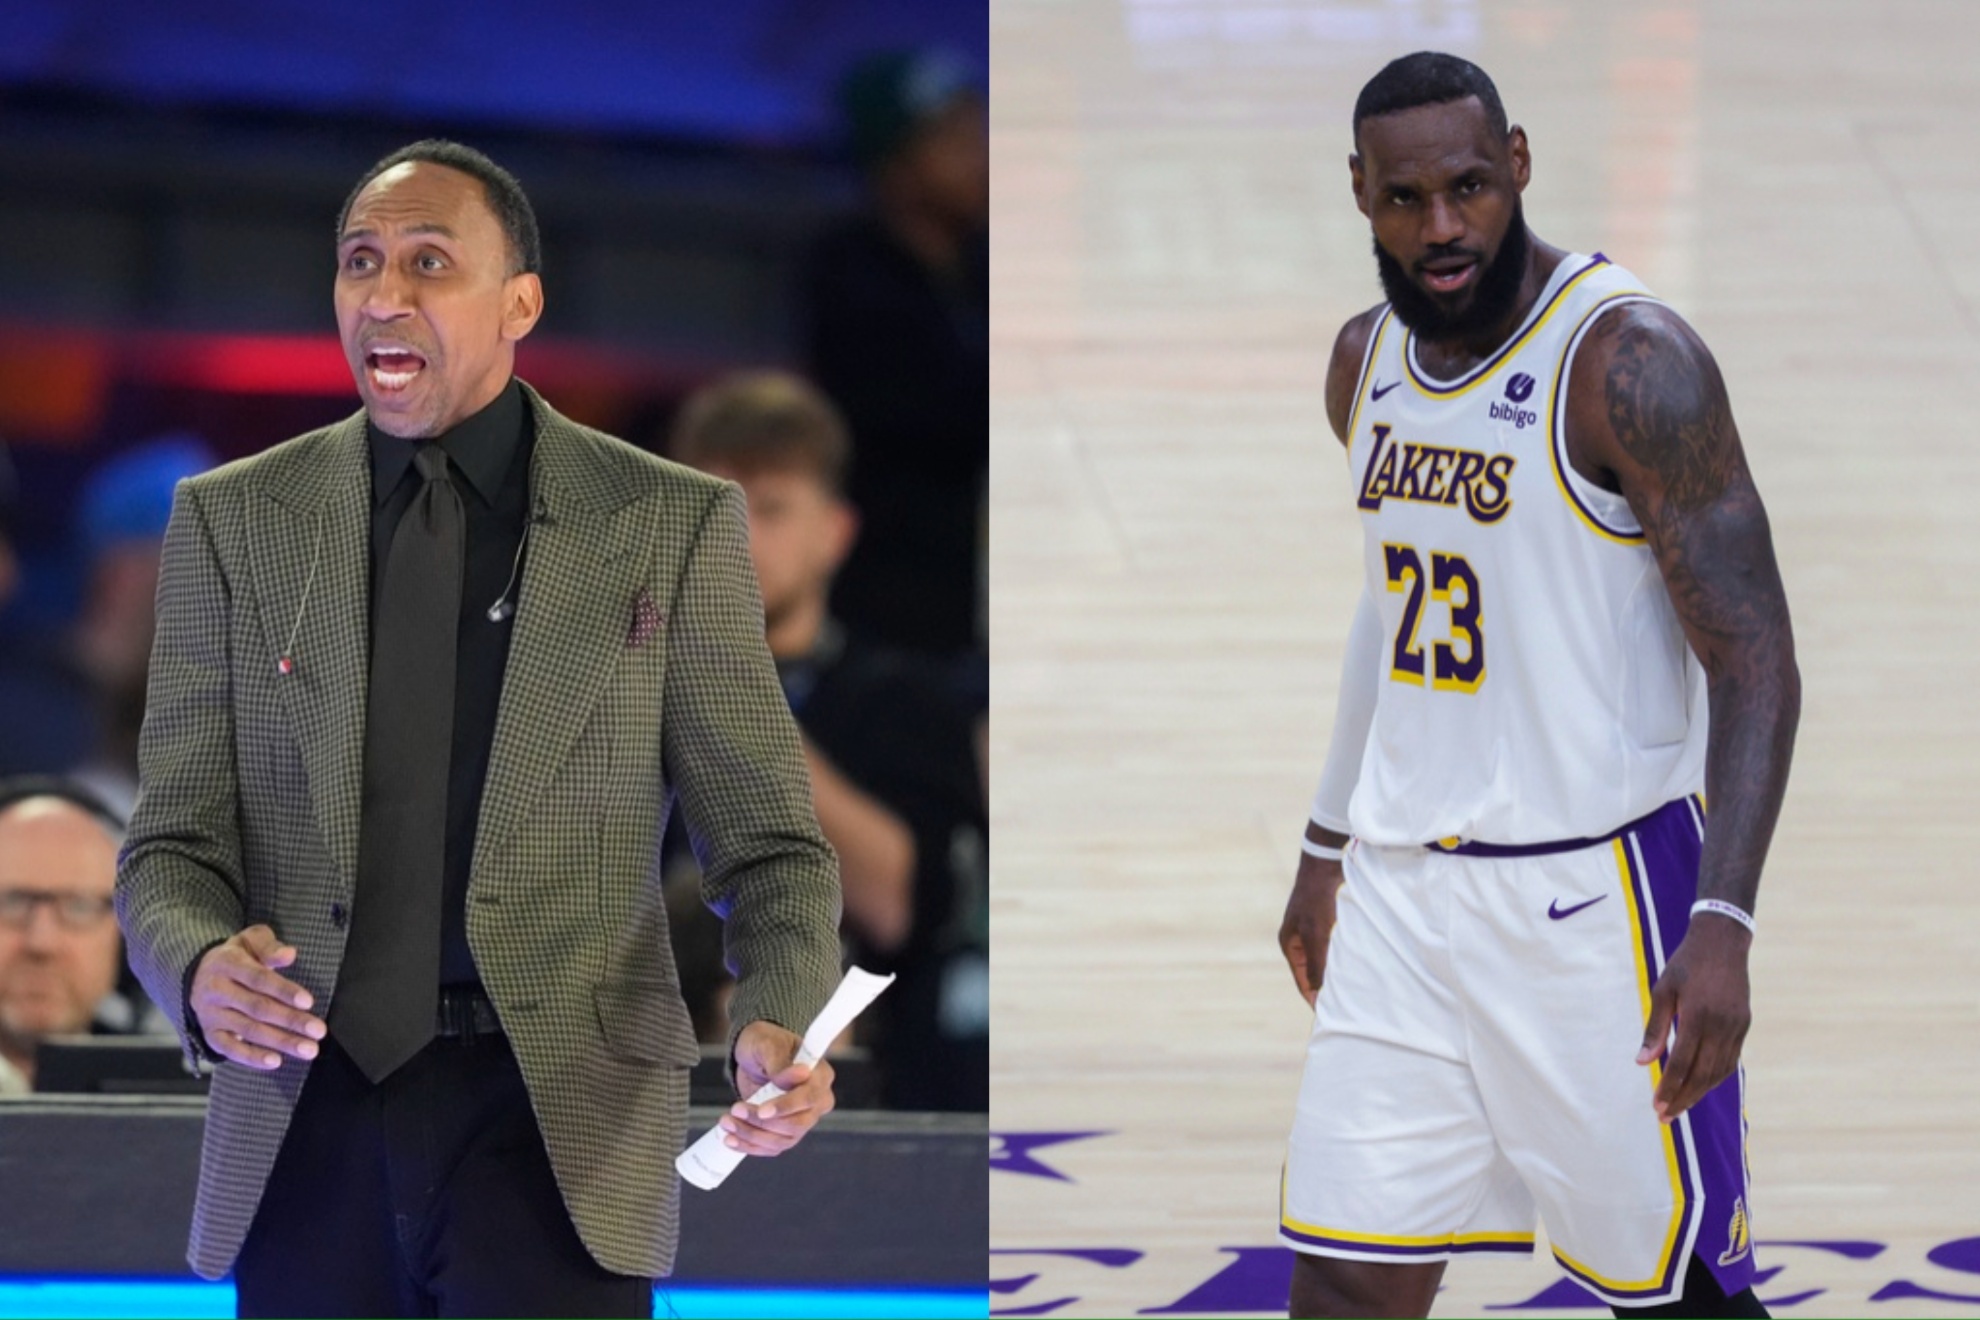 Stephen A. Smith has a long feud with LeBron James.